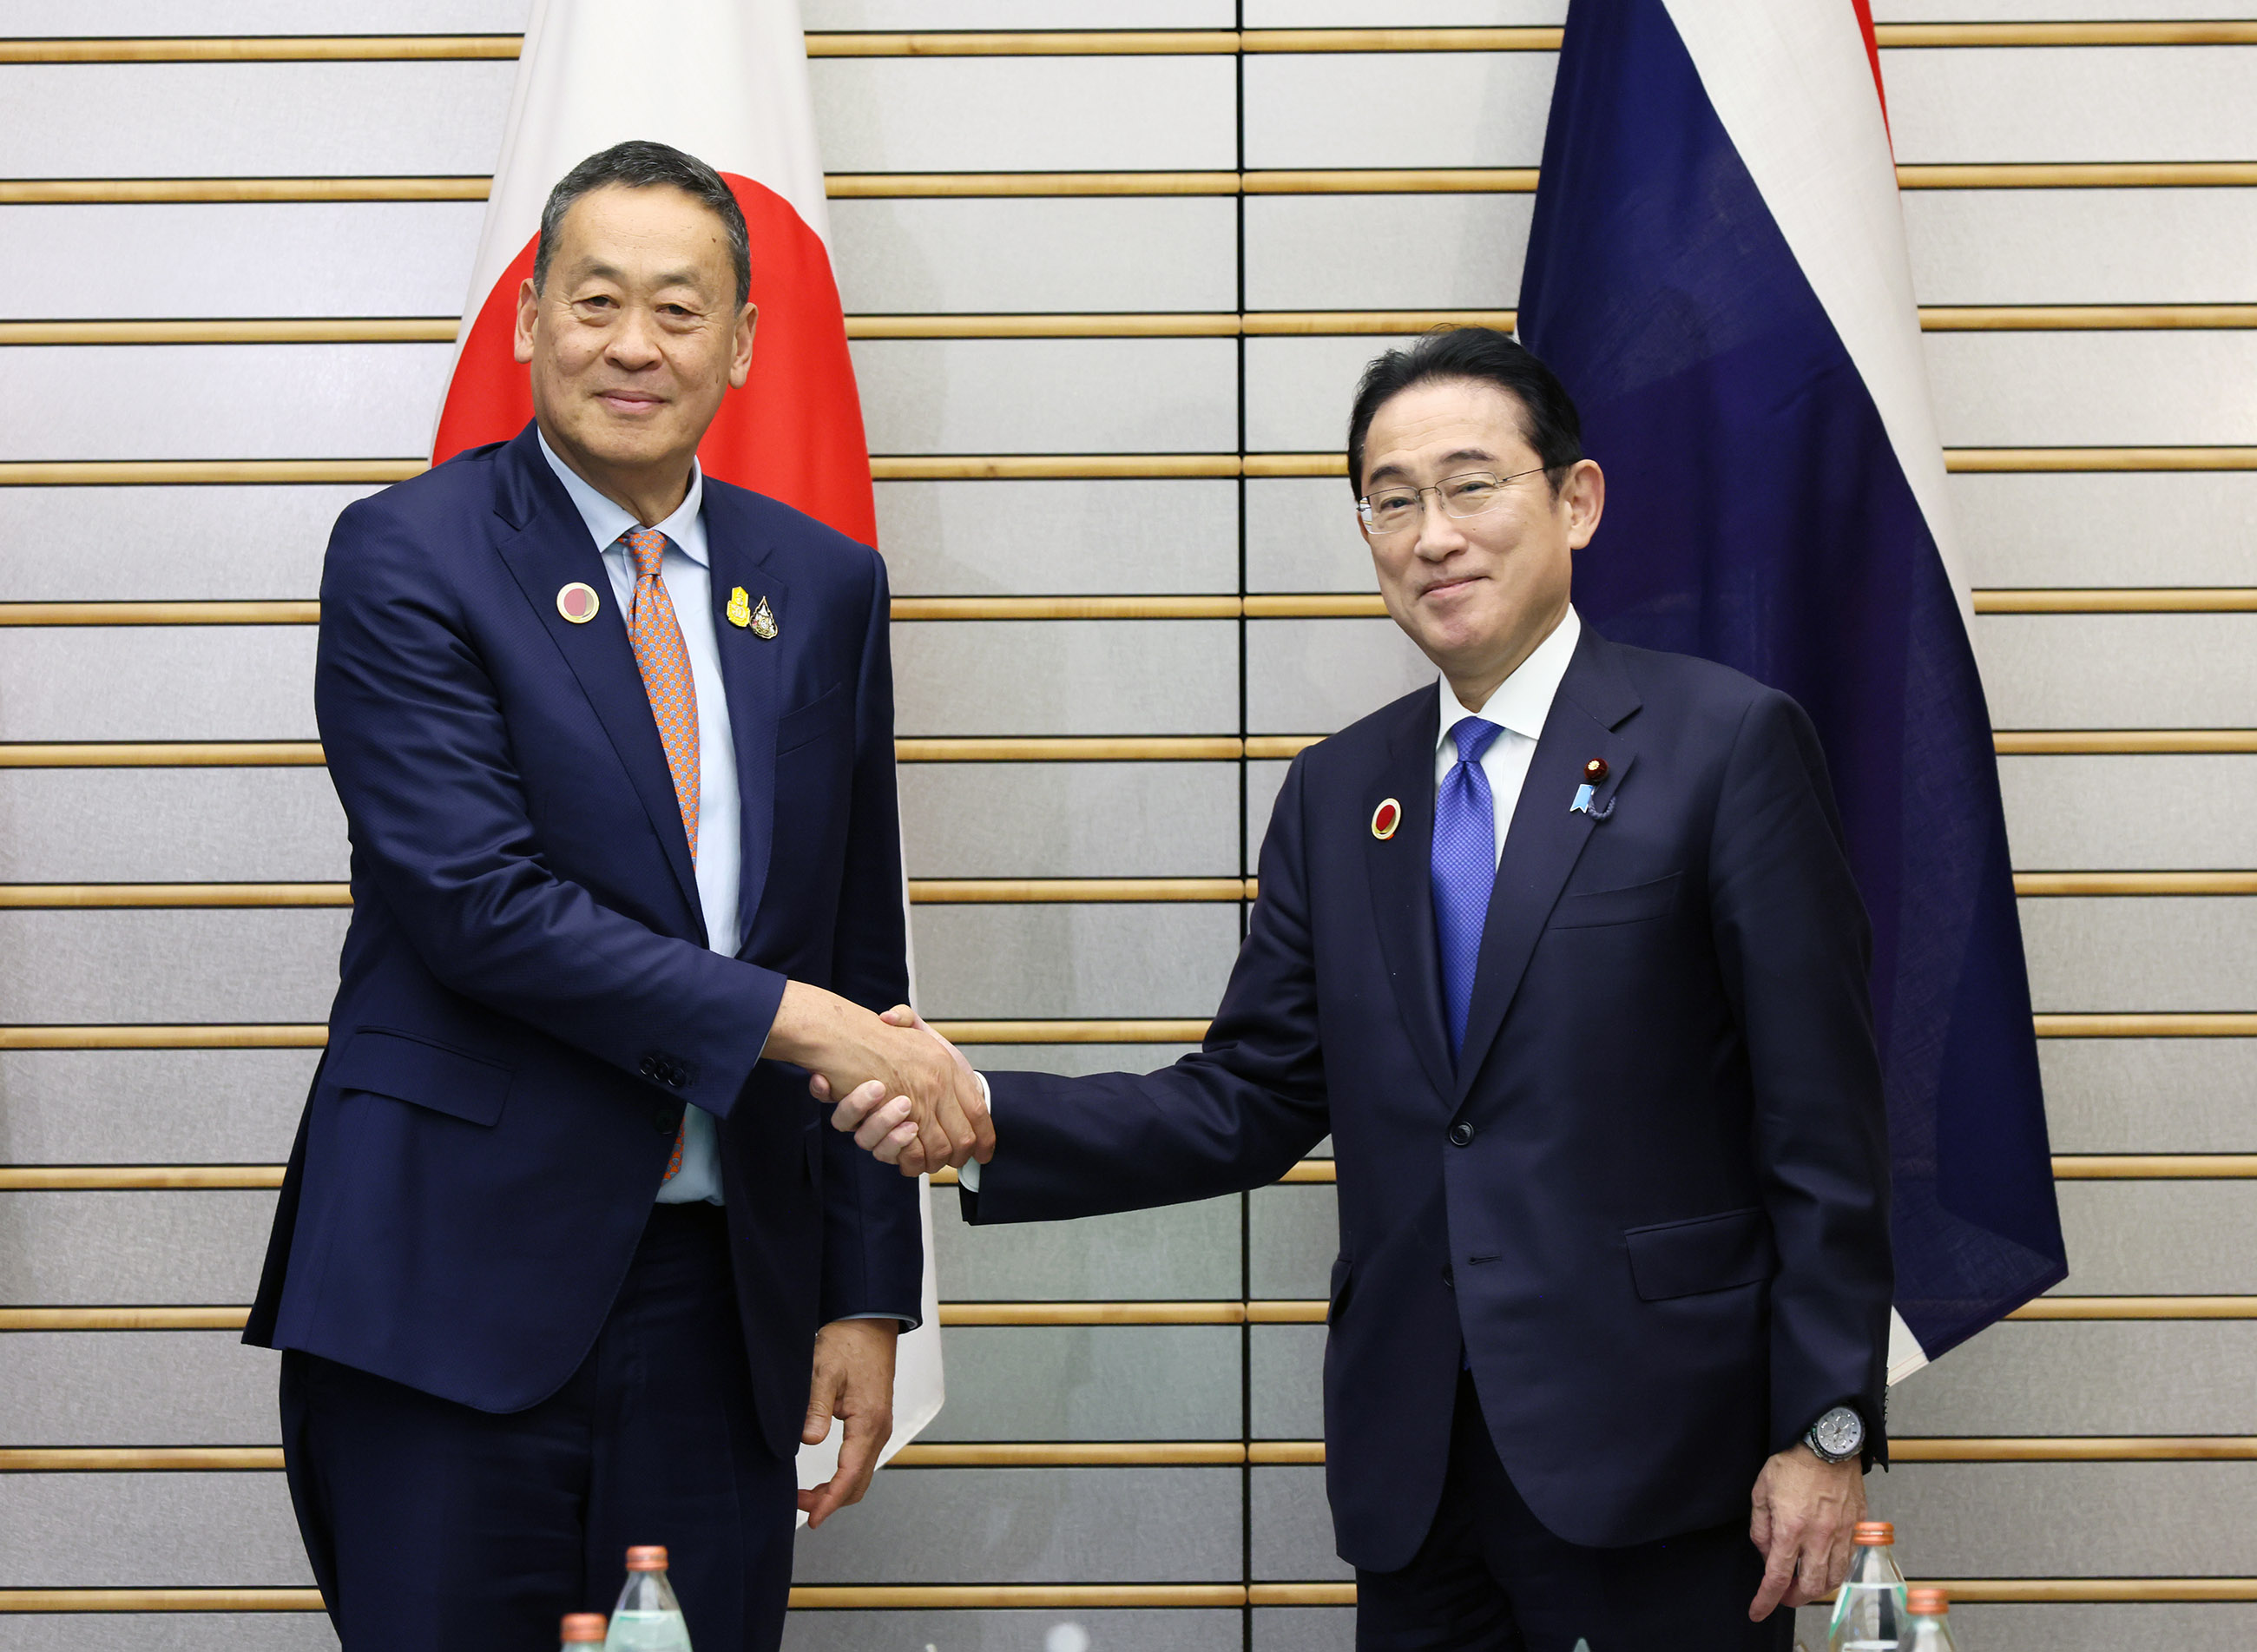 Summit Meetings with the Leaders of Countries Participating in the Commemorative Summit for the 50th Year of ASEAN-Japan Friendship and Cooperation: Second Day